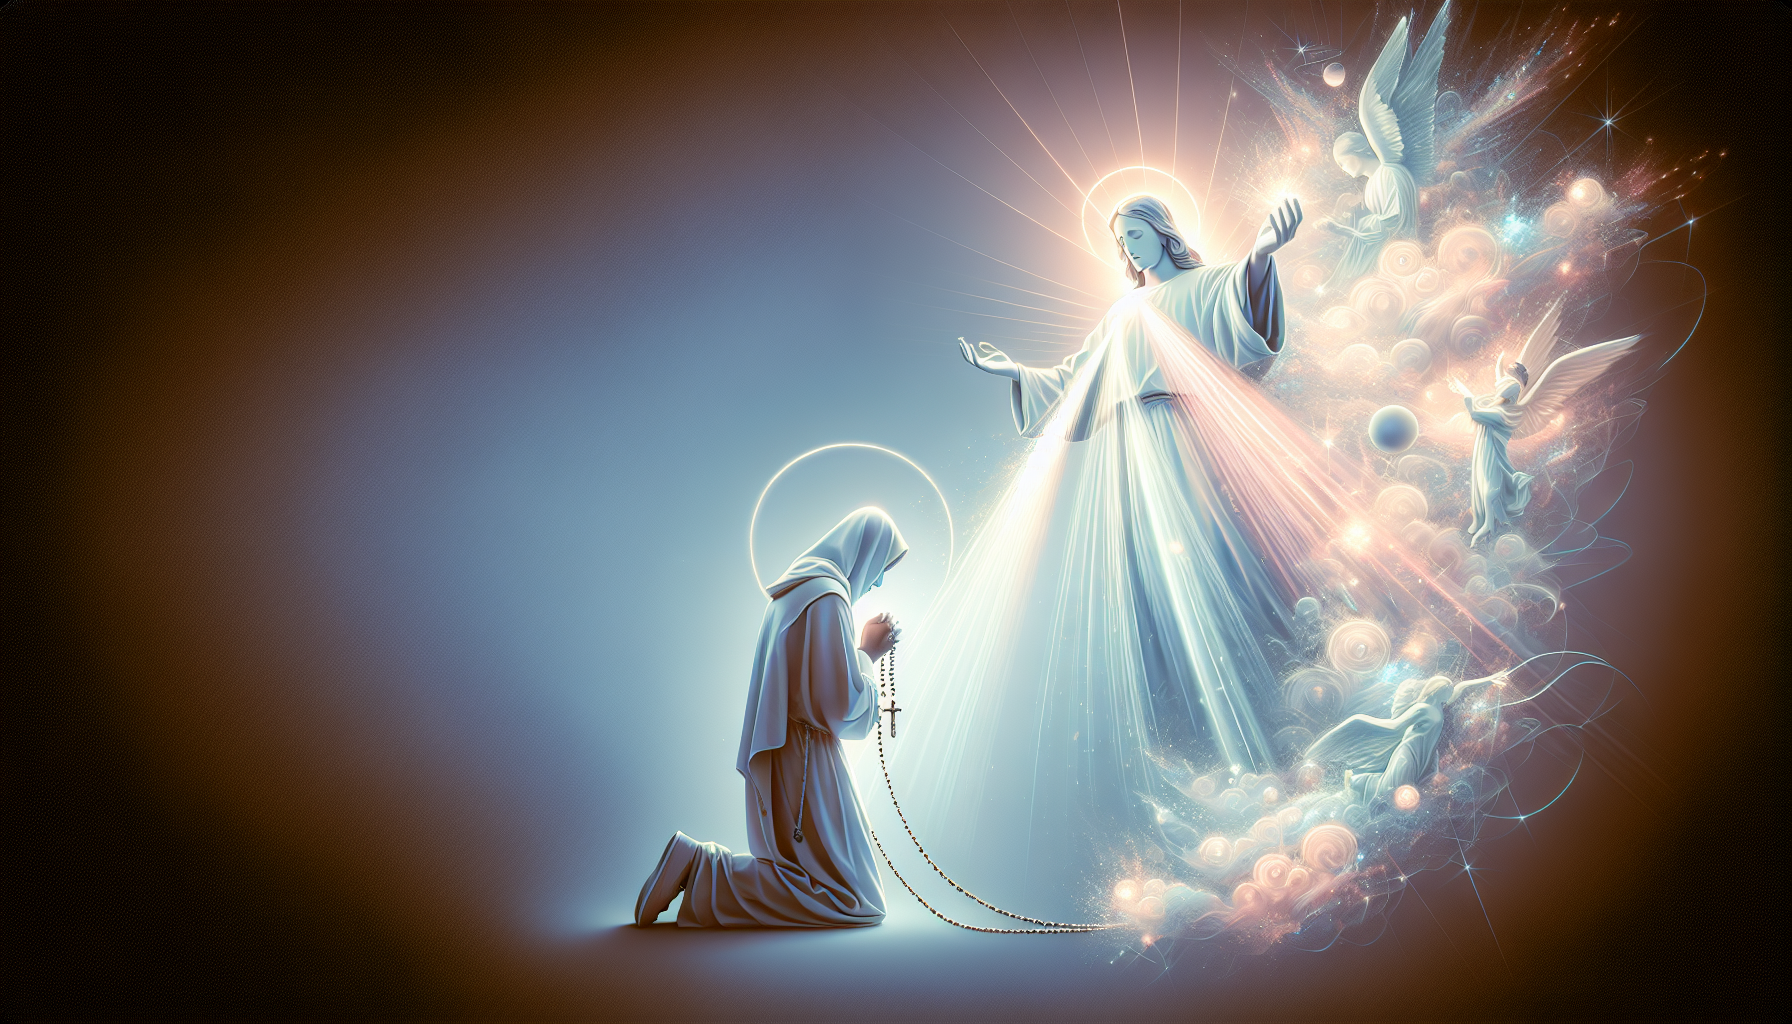 Create an image depicting a serene, spiritual scene where a person is kneeling in prayer with a rosary in hand, focusing on a depiction of Divine Mercy. Include a divine light emanating from an image